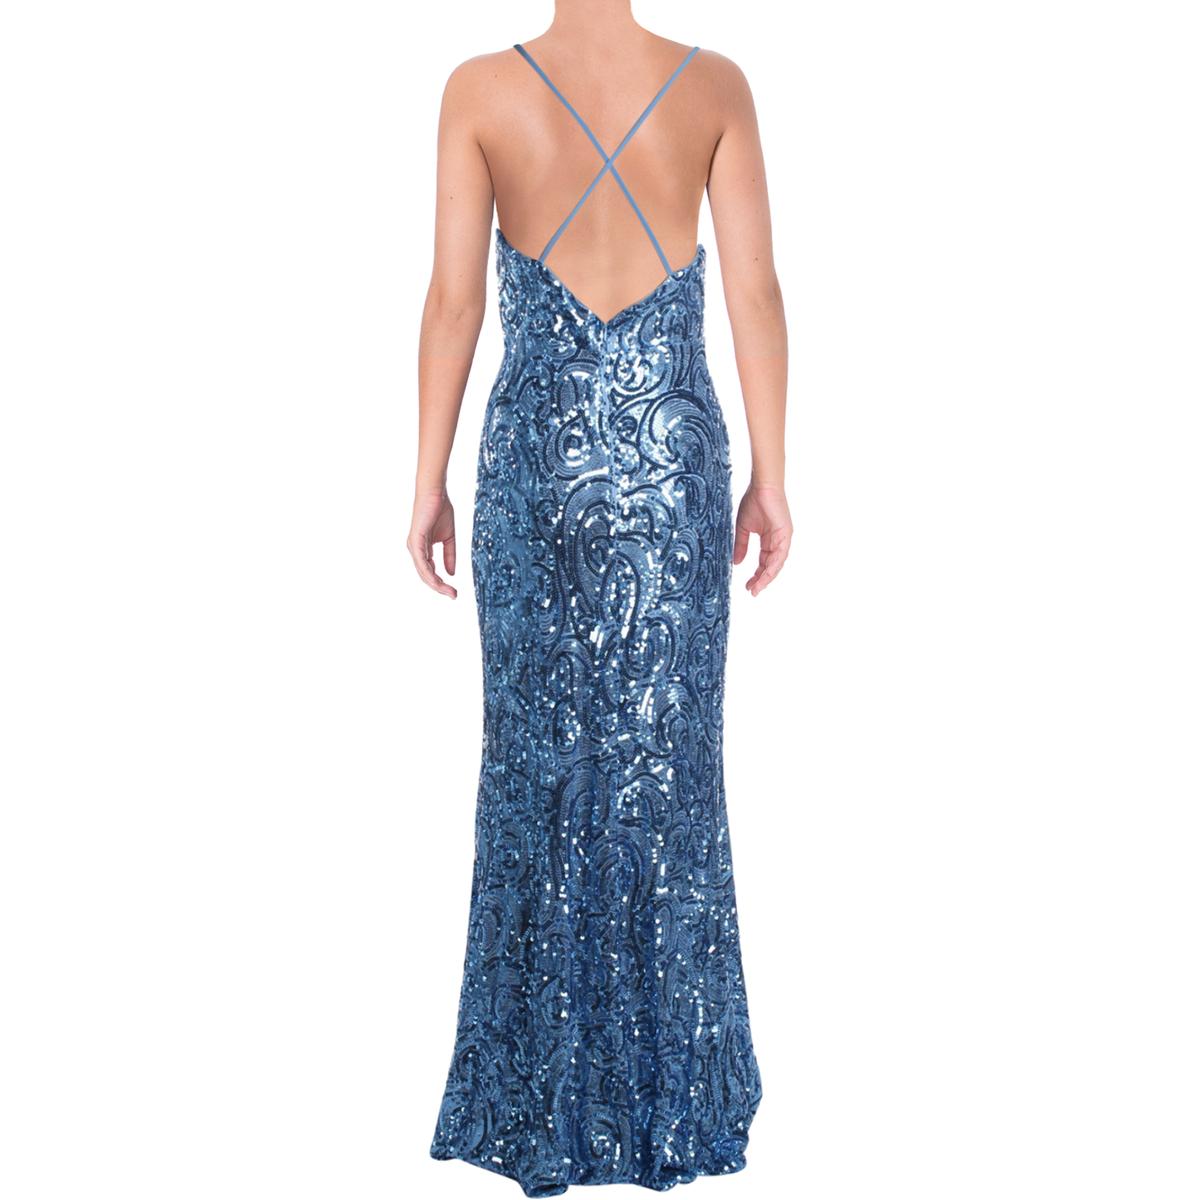 NW Nightway Womens Blue Sequined V-Neck Formal Evening Dress Gown 10 ...